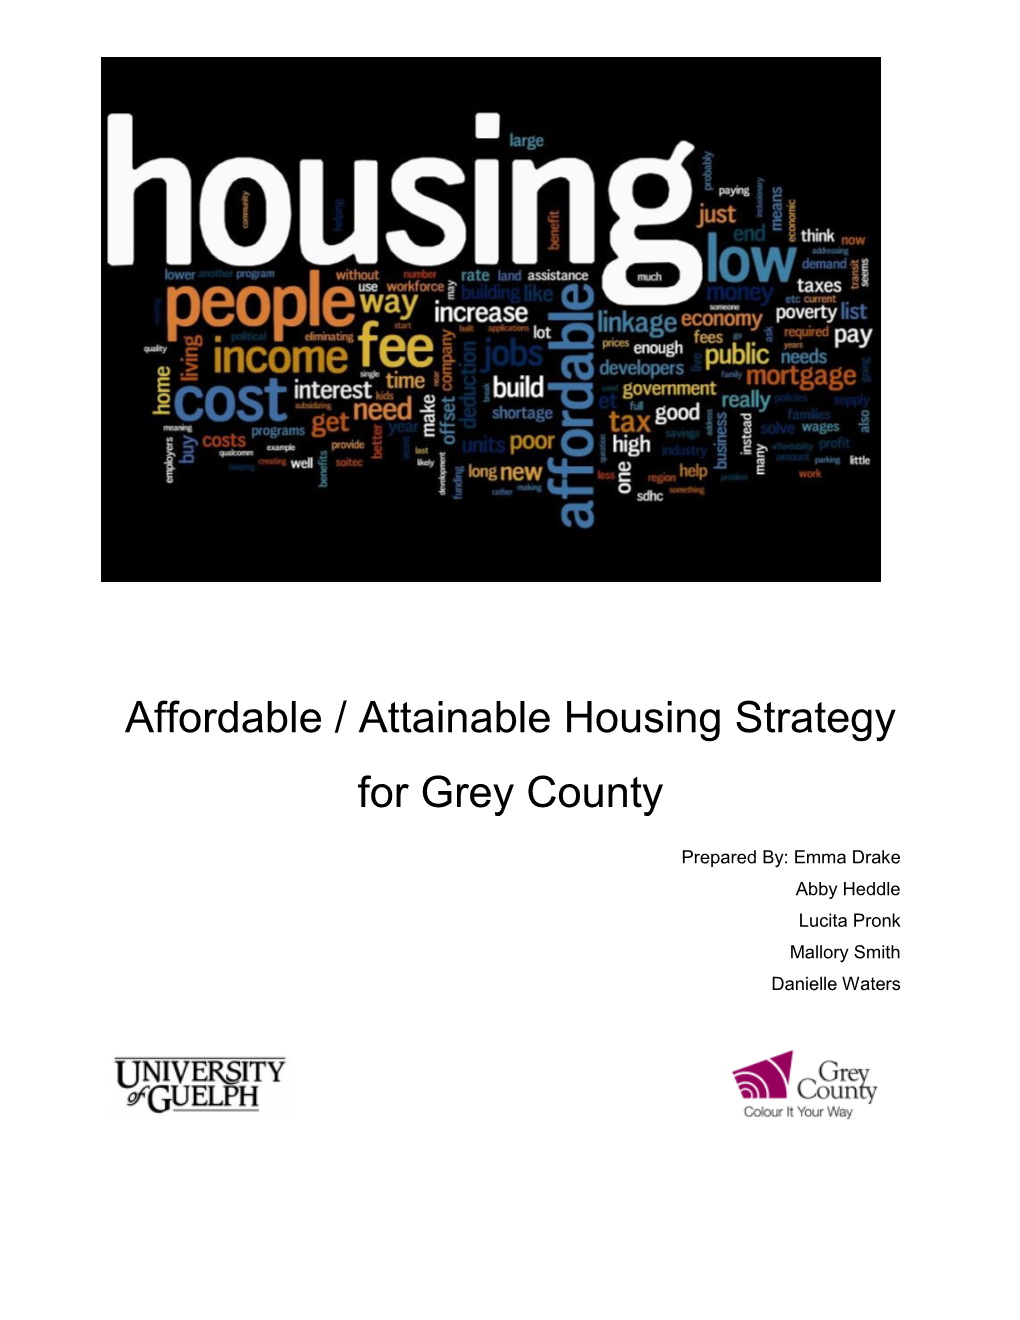 Affordable / Attainable Housing Strategy for Grey County